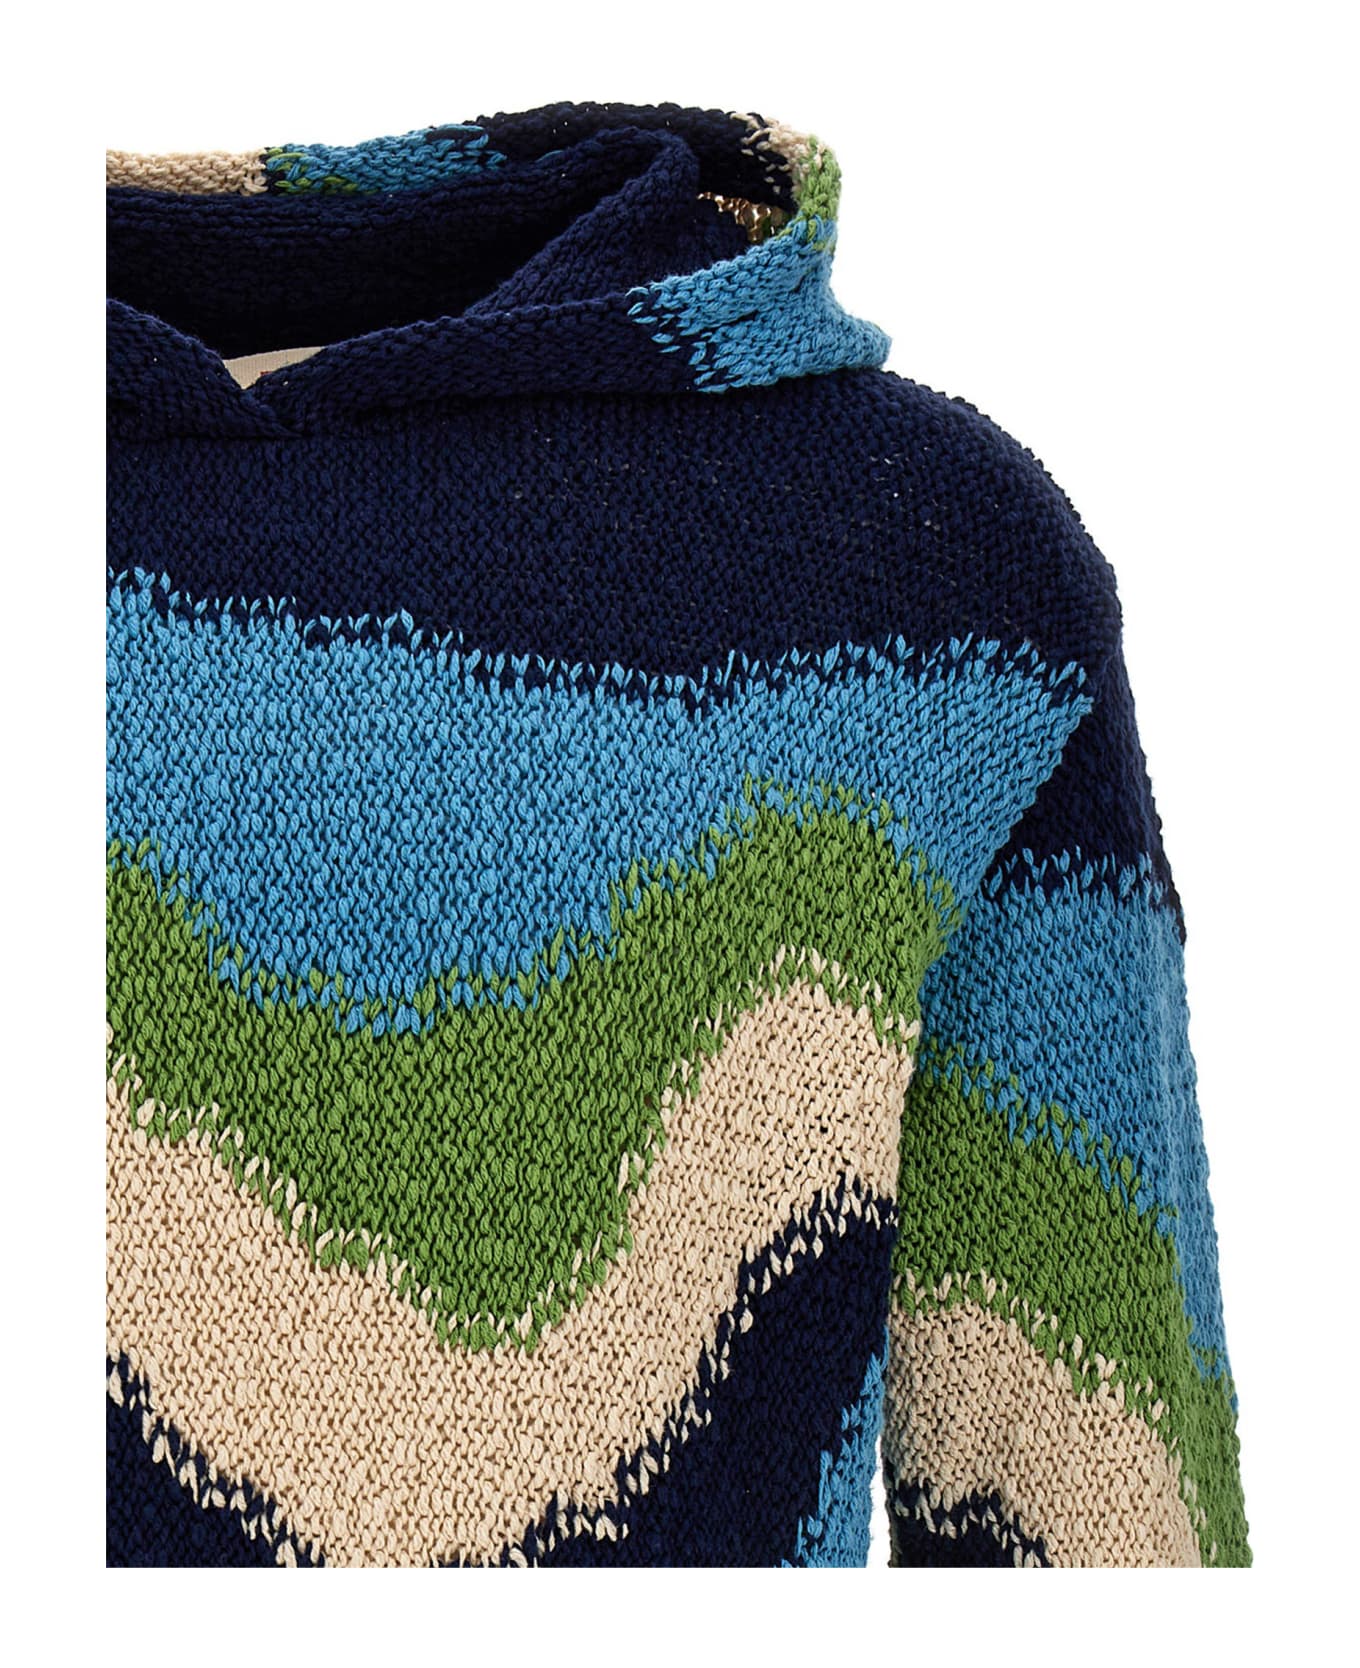 Marni Patterned Hooded Sweater - POWDERBLUE